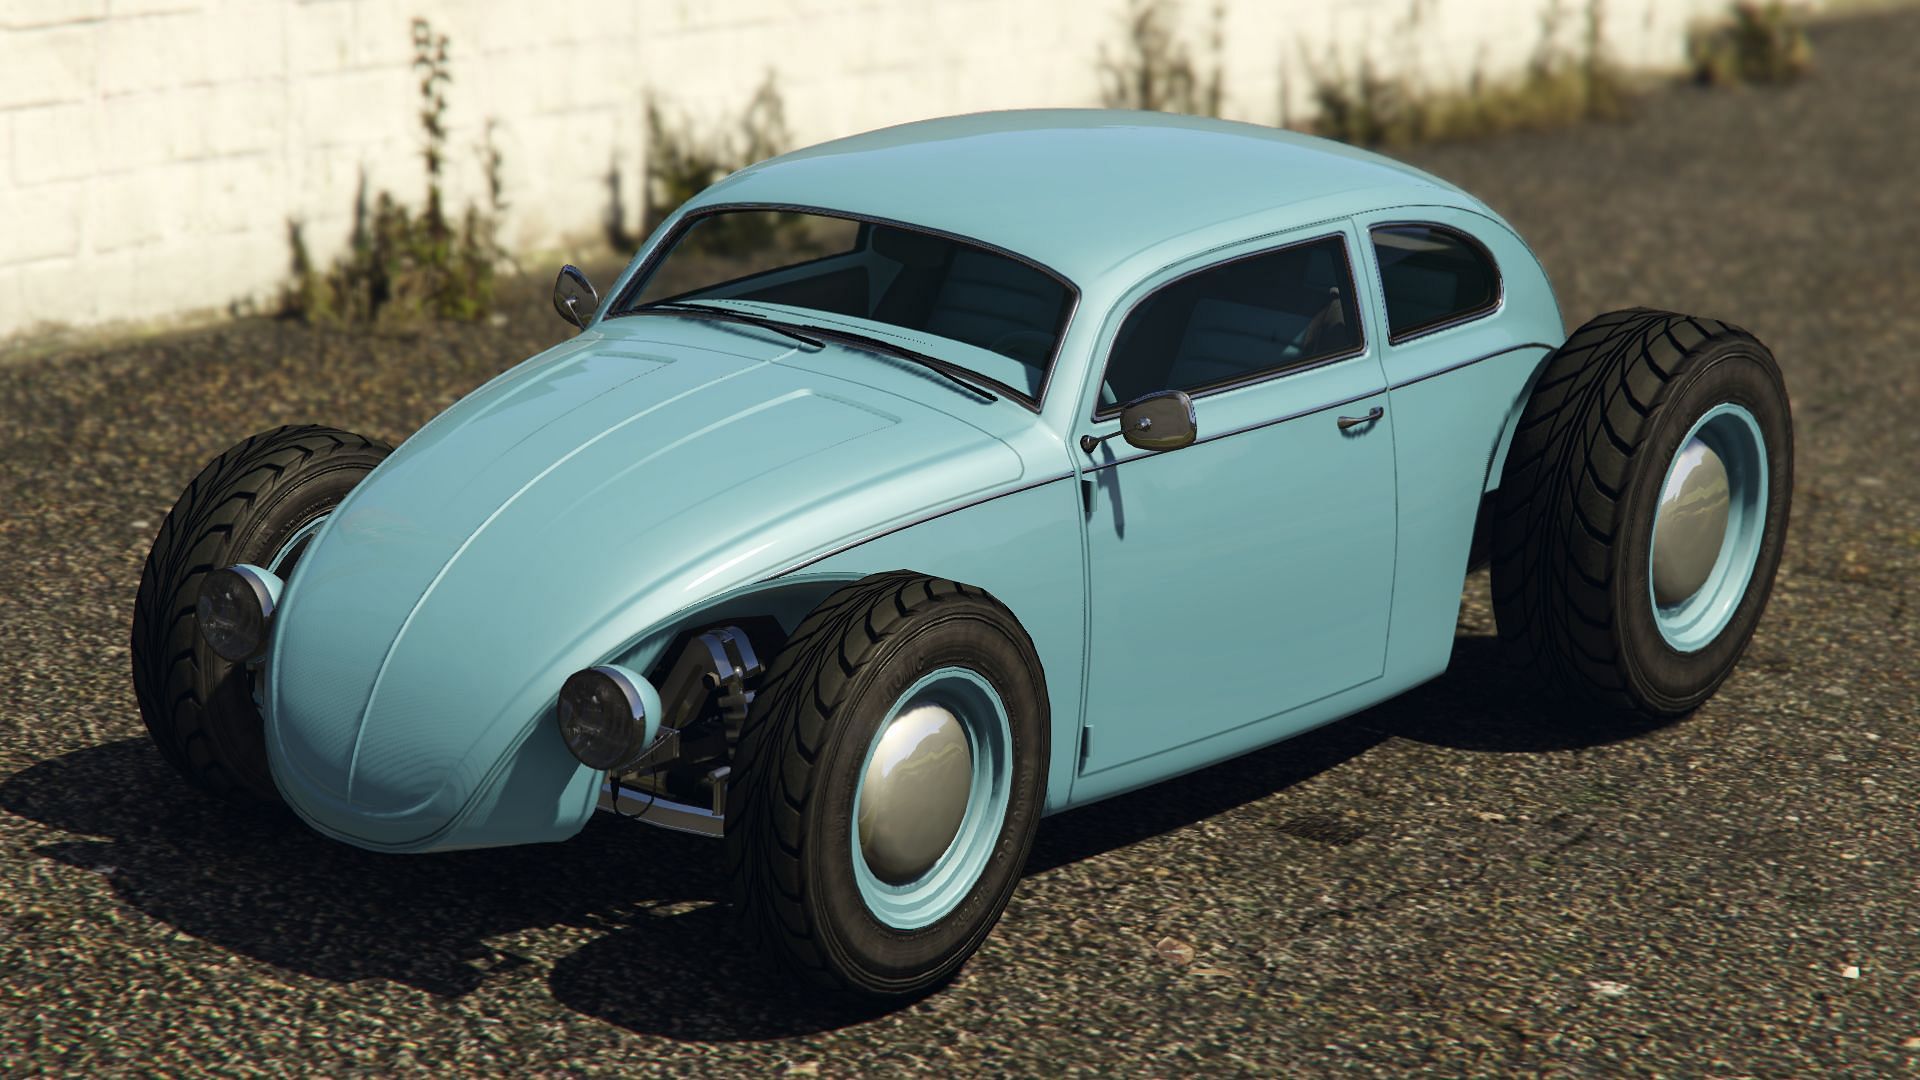 This vehicle can go up to 137.50 mph in GTA Online (Image via Rockstar Games)